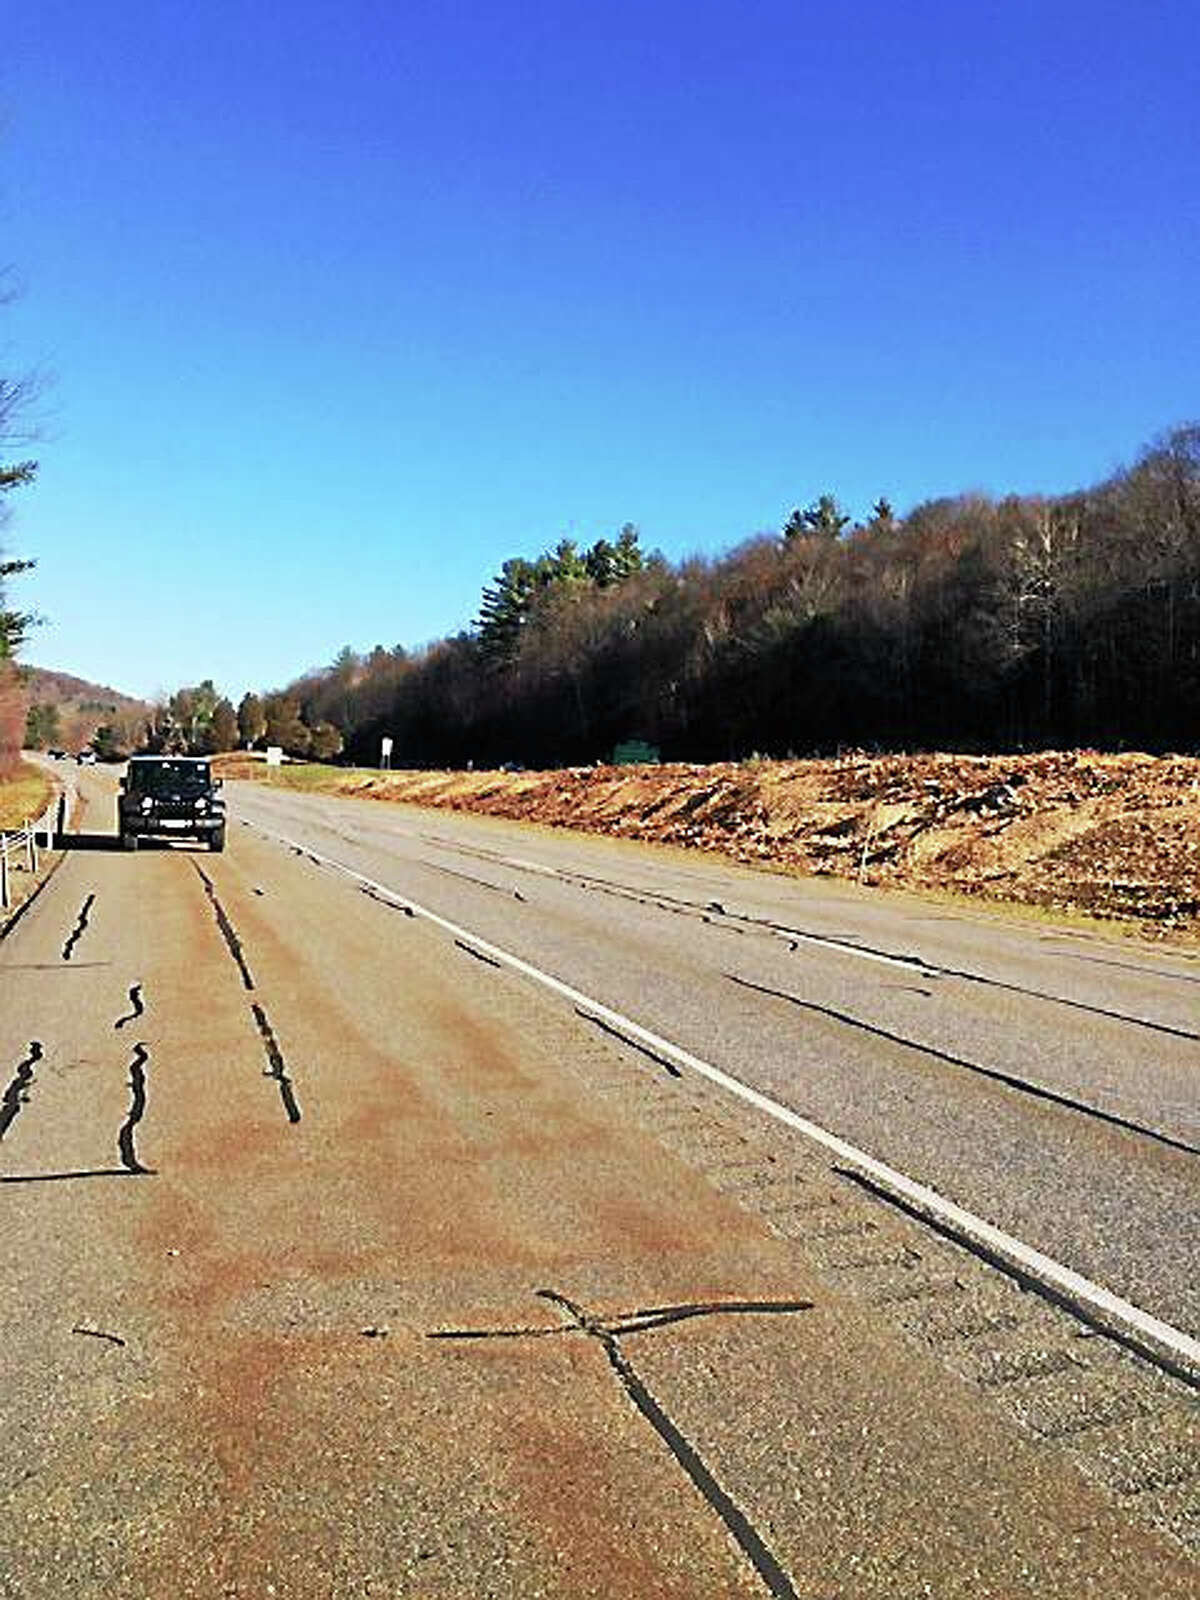 State Sen. Kevin Witkos wants answers from state Department of Transportation regarding the clear-cutting of trees in the Route 8 median between Winsted and Torrington.